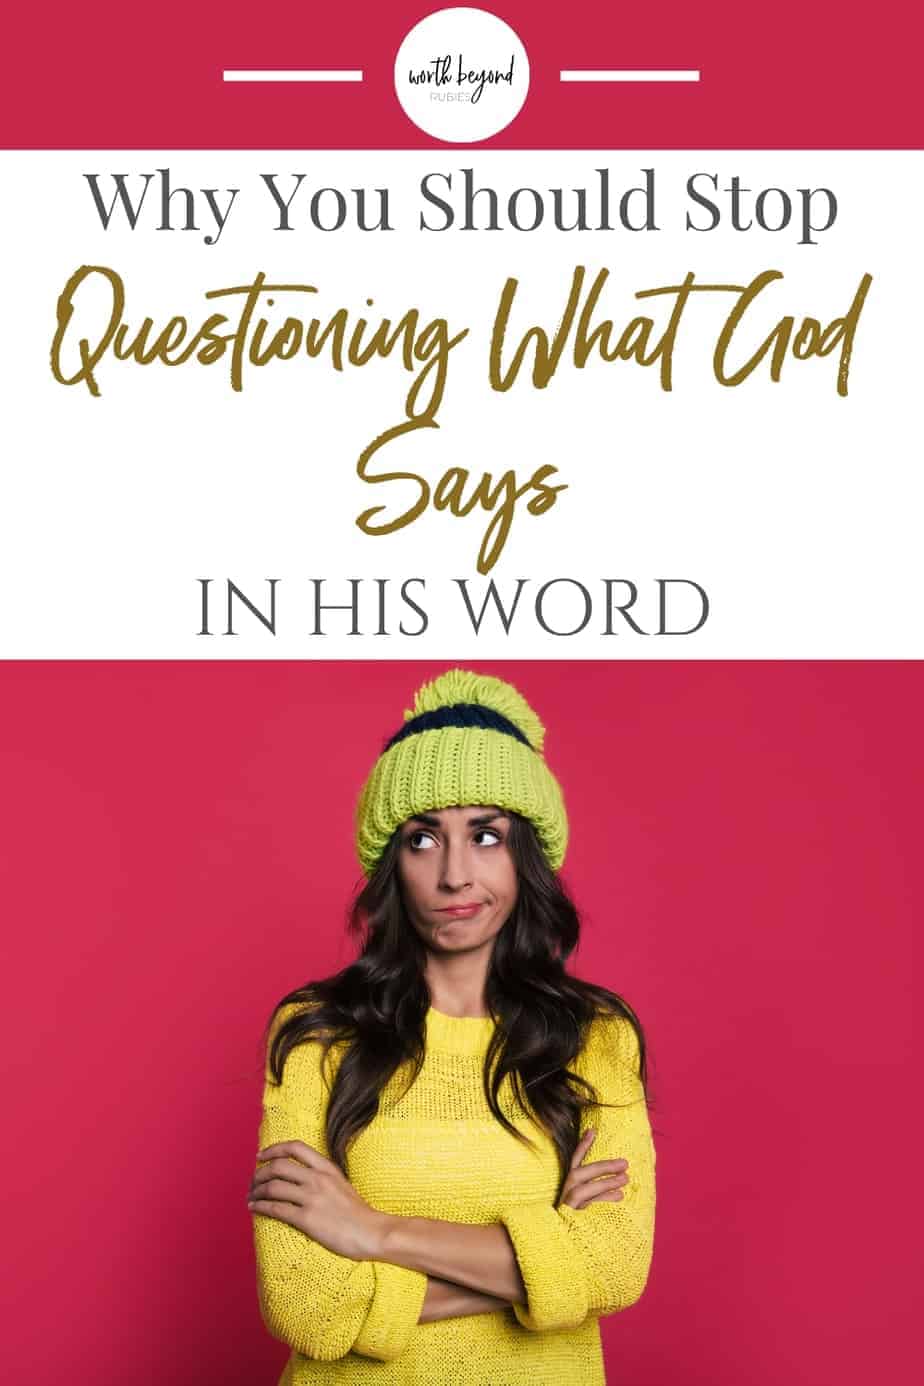 An image of a woman looking skeptical and text that says Why You Should Stop Questioning What God Says in His Word